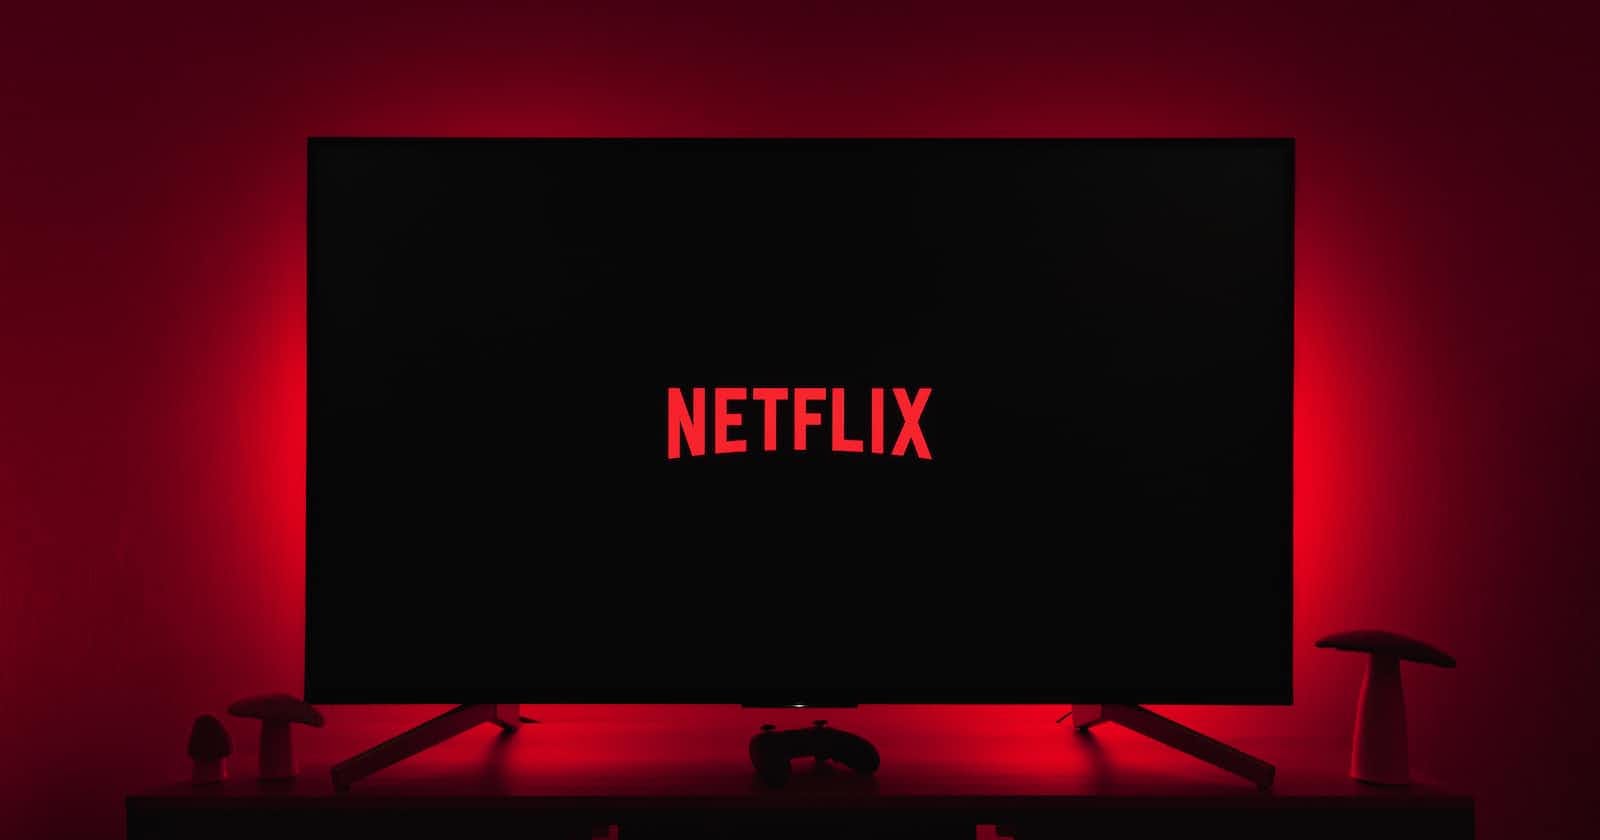 How did Netflix use technology to change the way we watch movies?